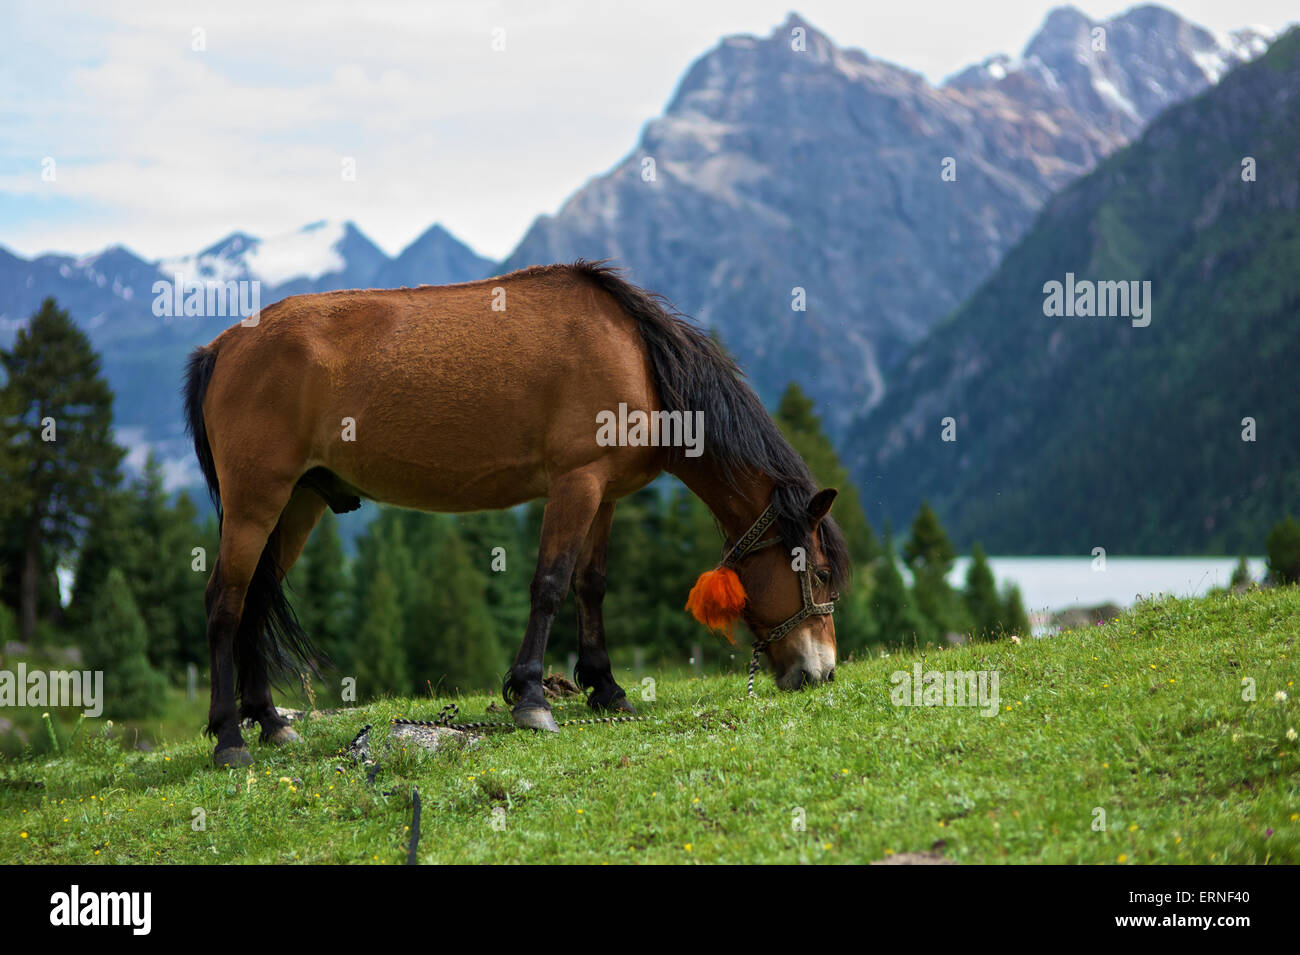 Horse grazing on grass field with lake and mountain range in the background; Ganze, Sichuan, China Stock Photo